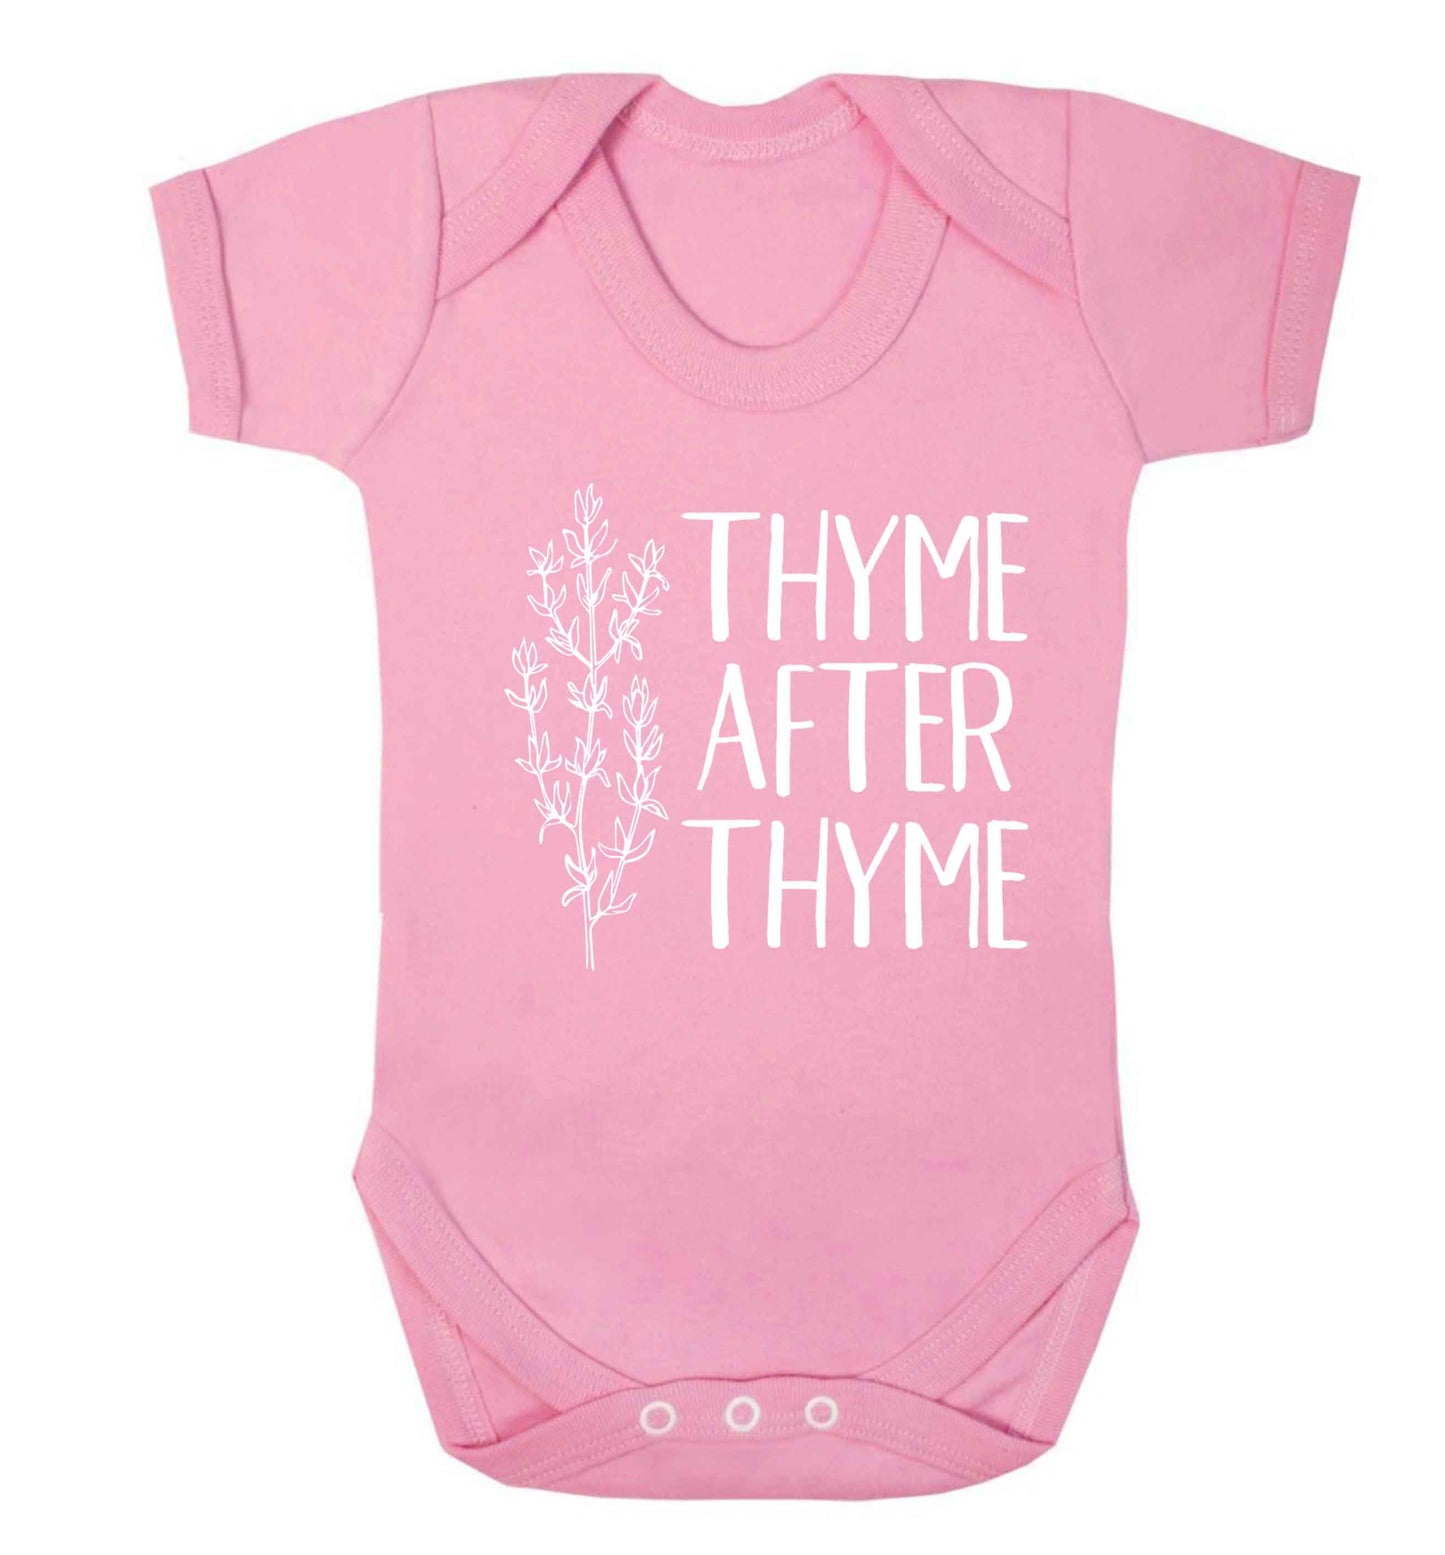 Thyme after thyme Baby Vest pale pink 18-24 months